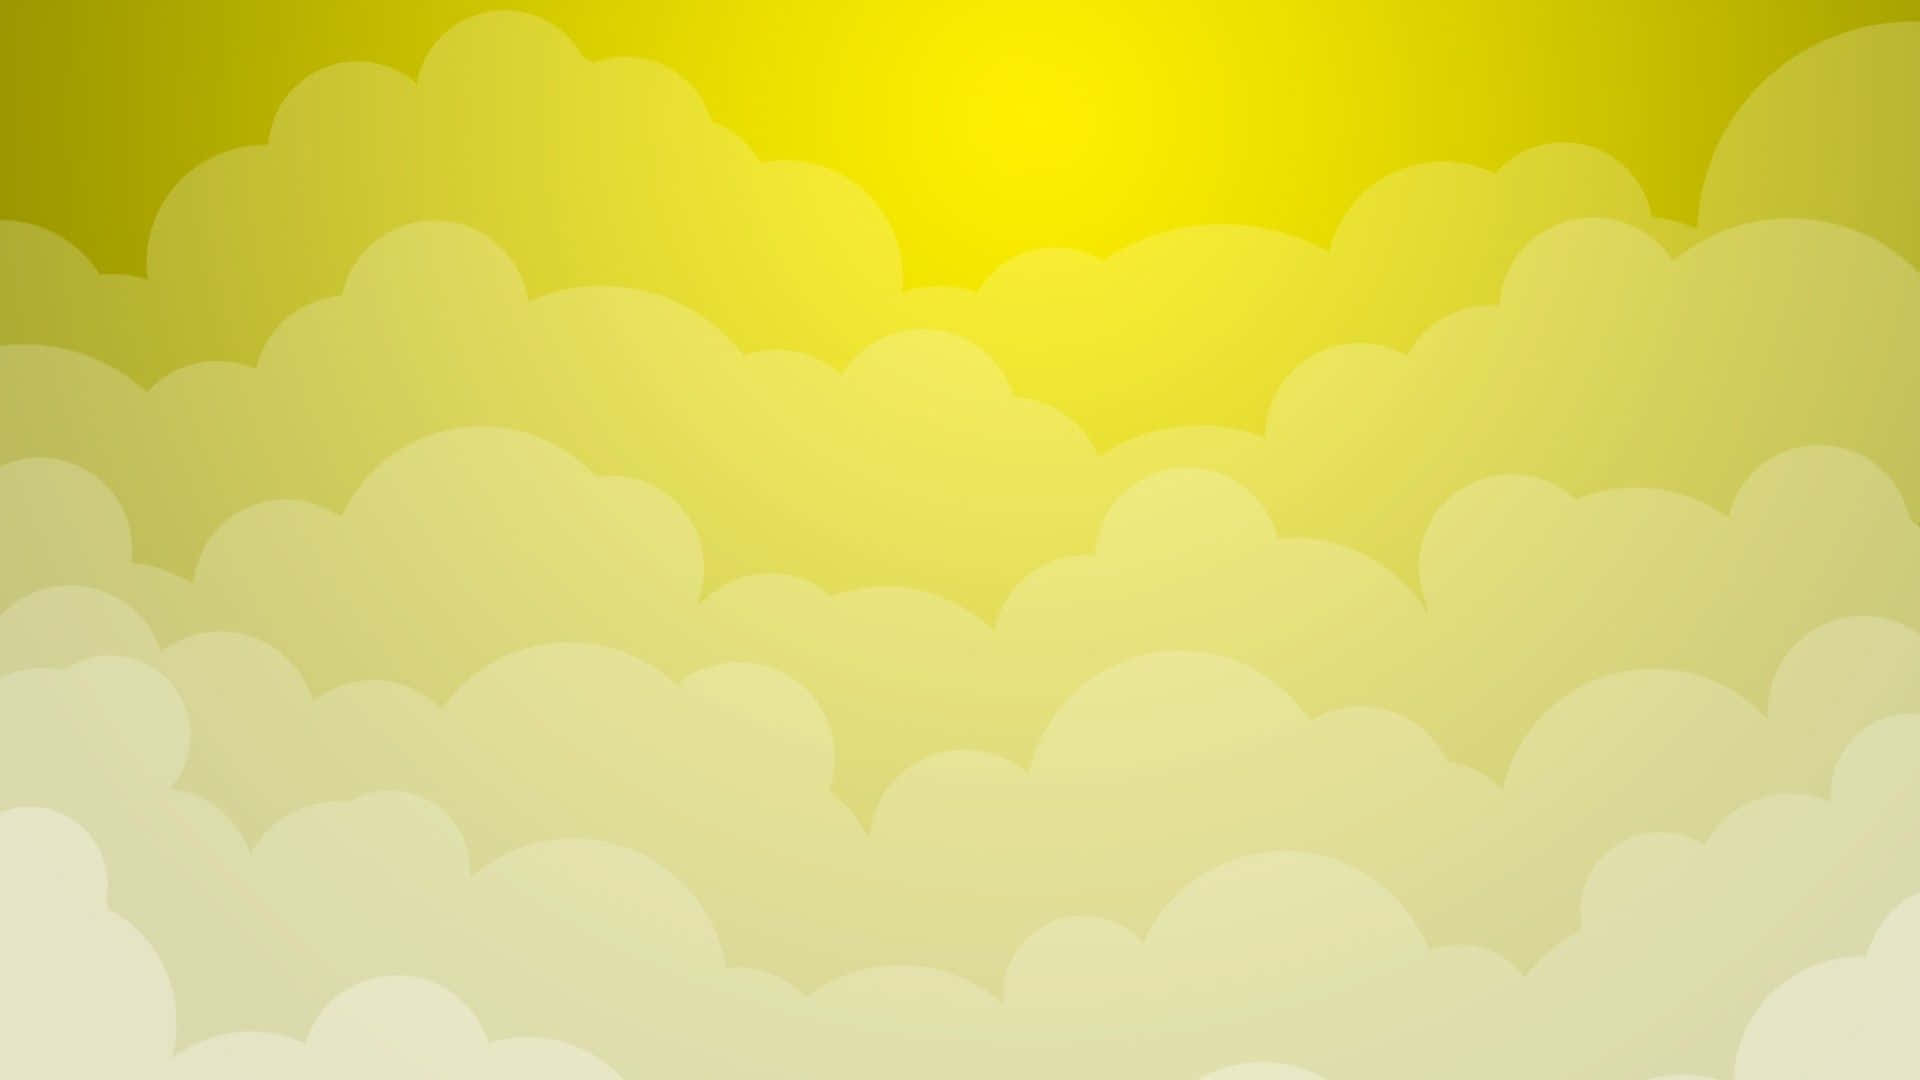 A Yellow Sun And Clouds In The Sky Wallpaper